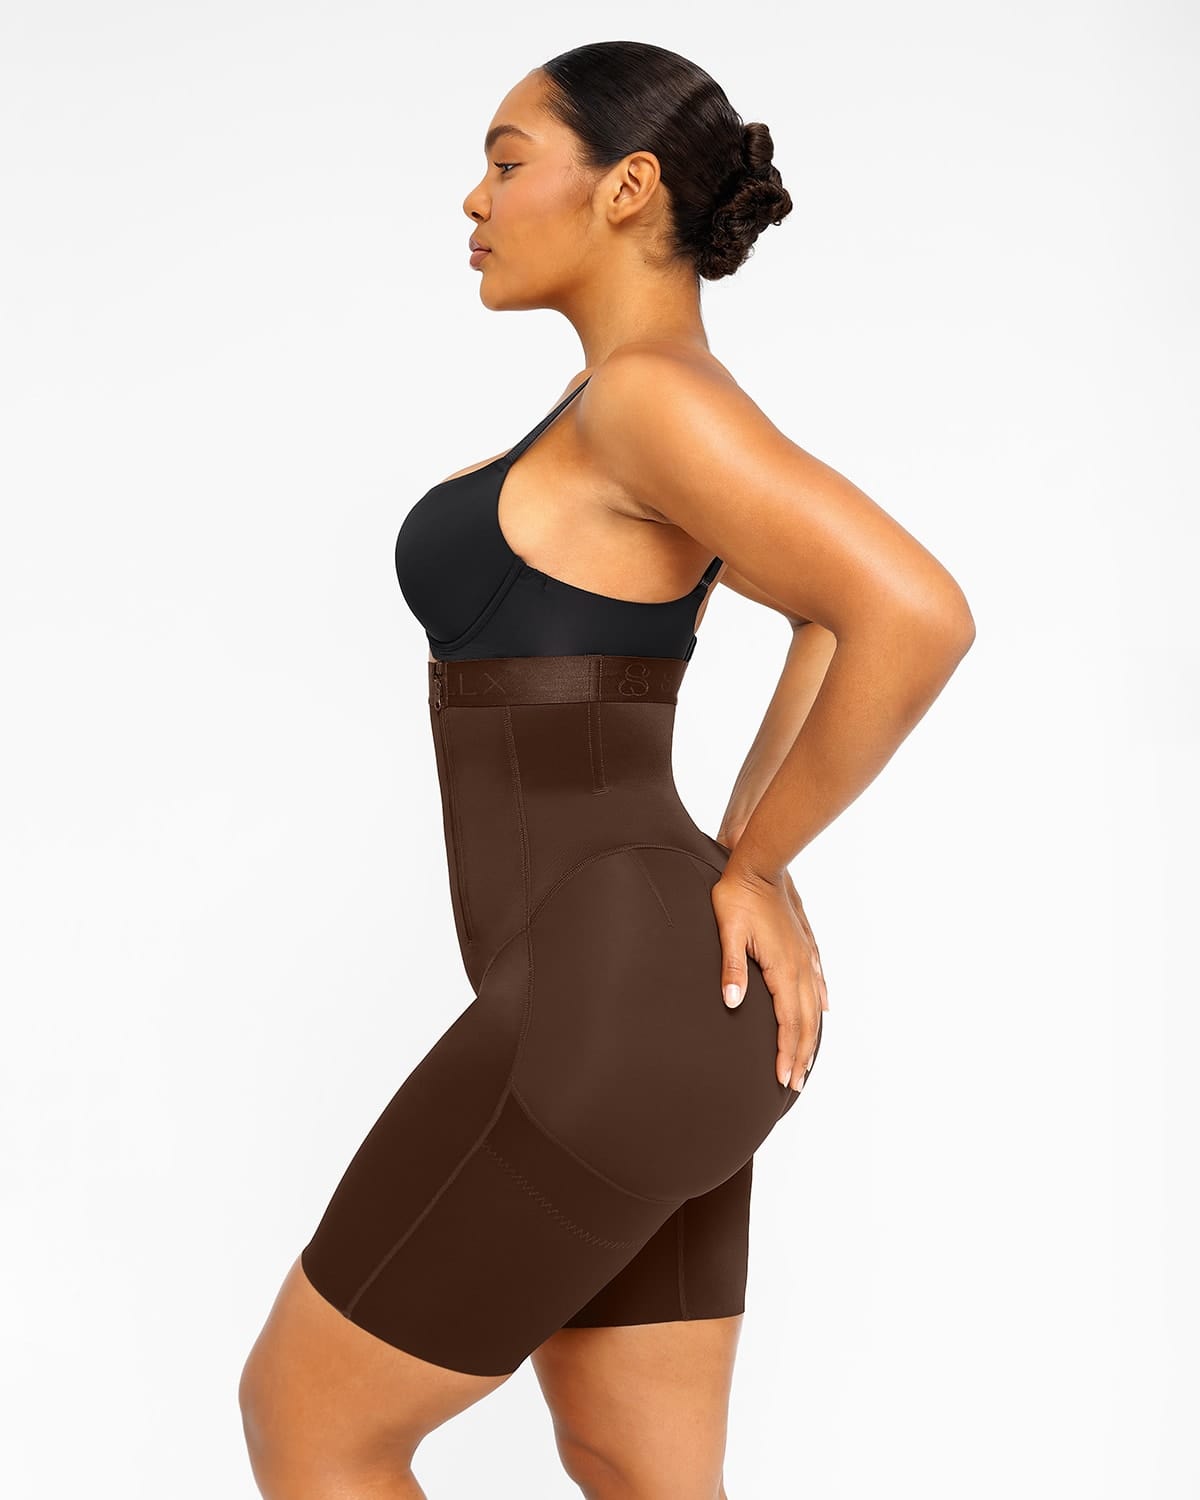 Get that Hourglass Shape with AirSlim Boned Sculpt High Waist Shorts - King  NewsWire